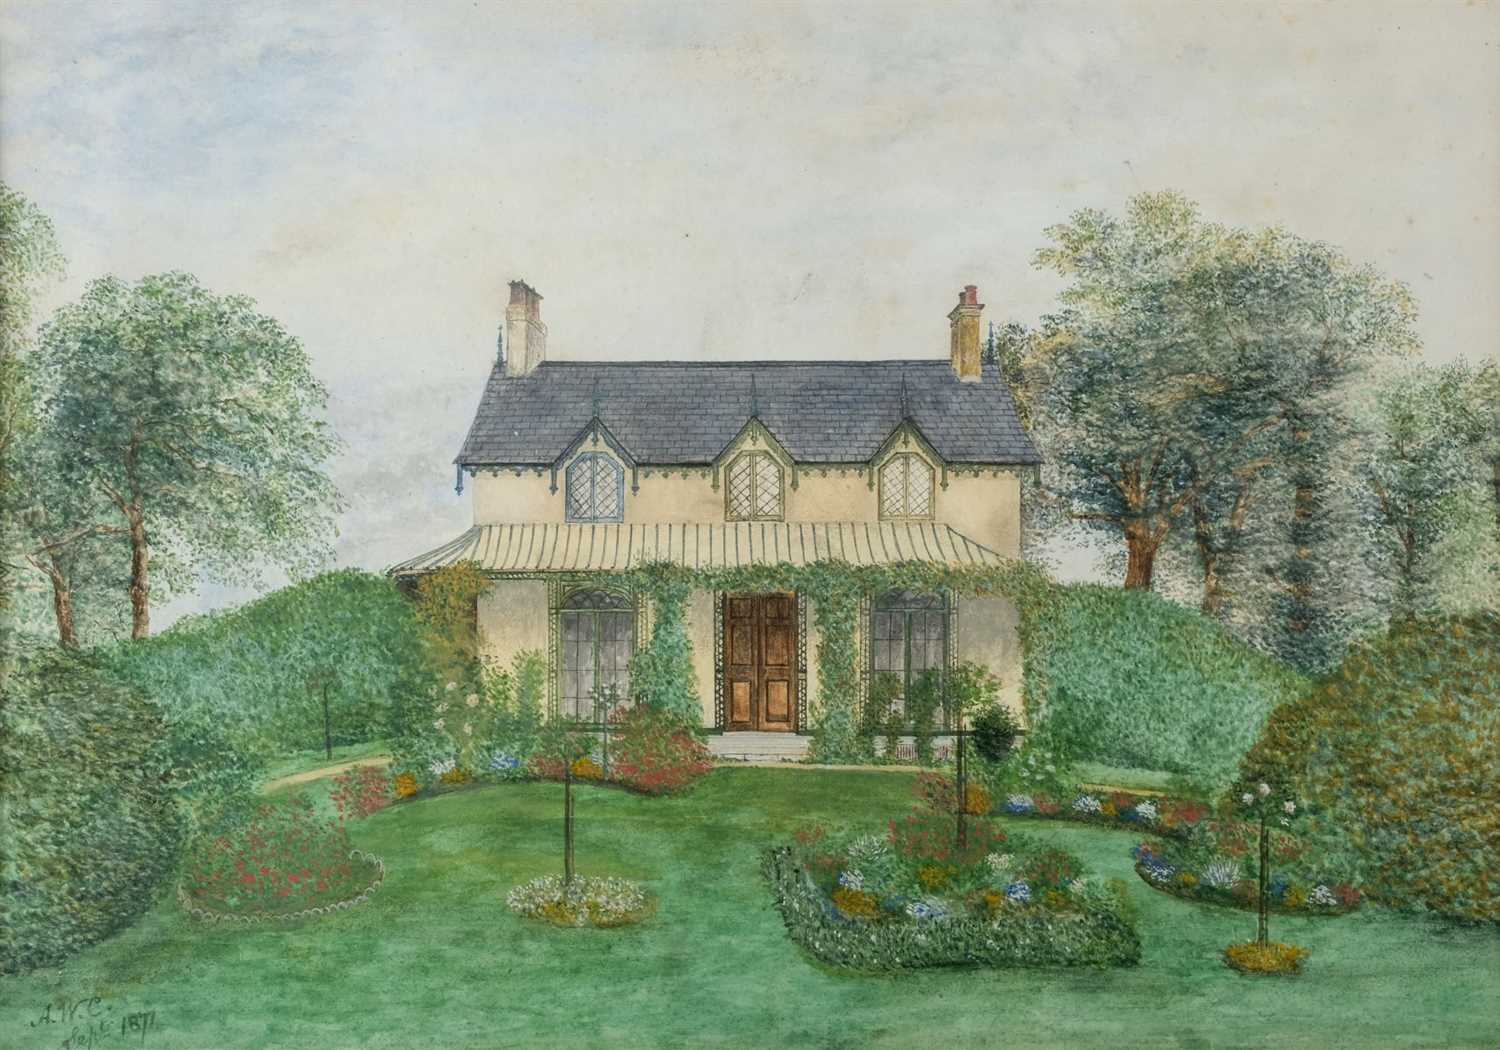 Lot 431 - Domestic Architecture. A gabled late Victorian house and flower garden, by A.W.C., Septr. 1871